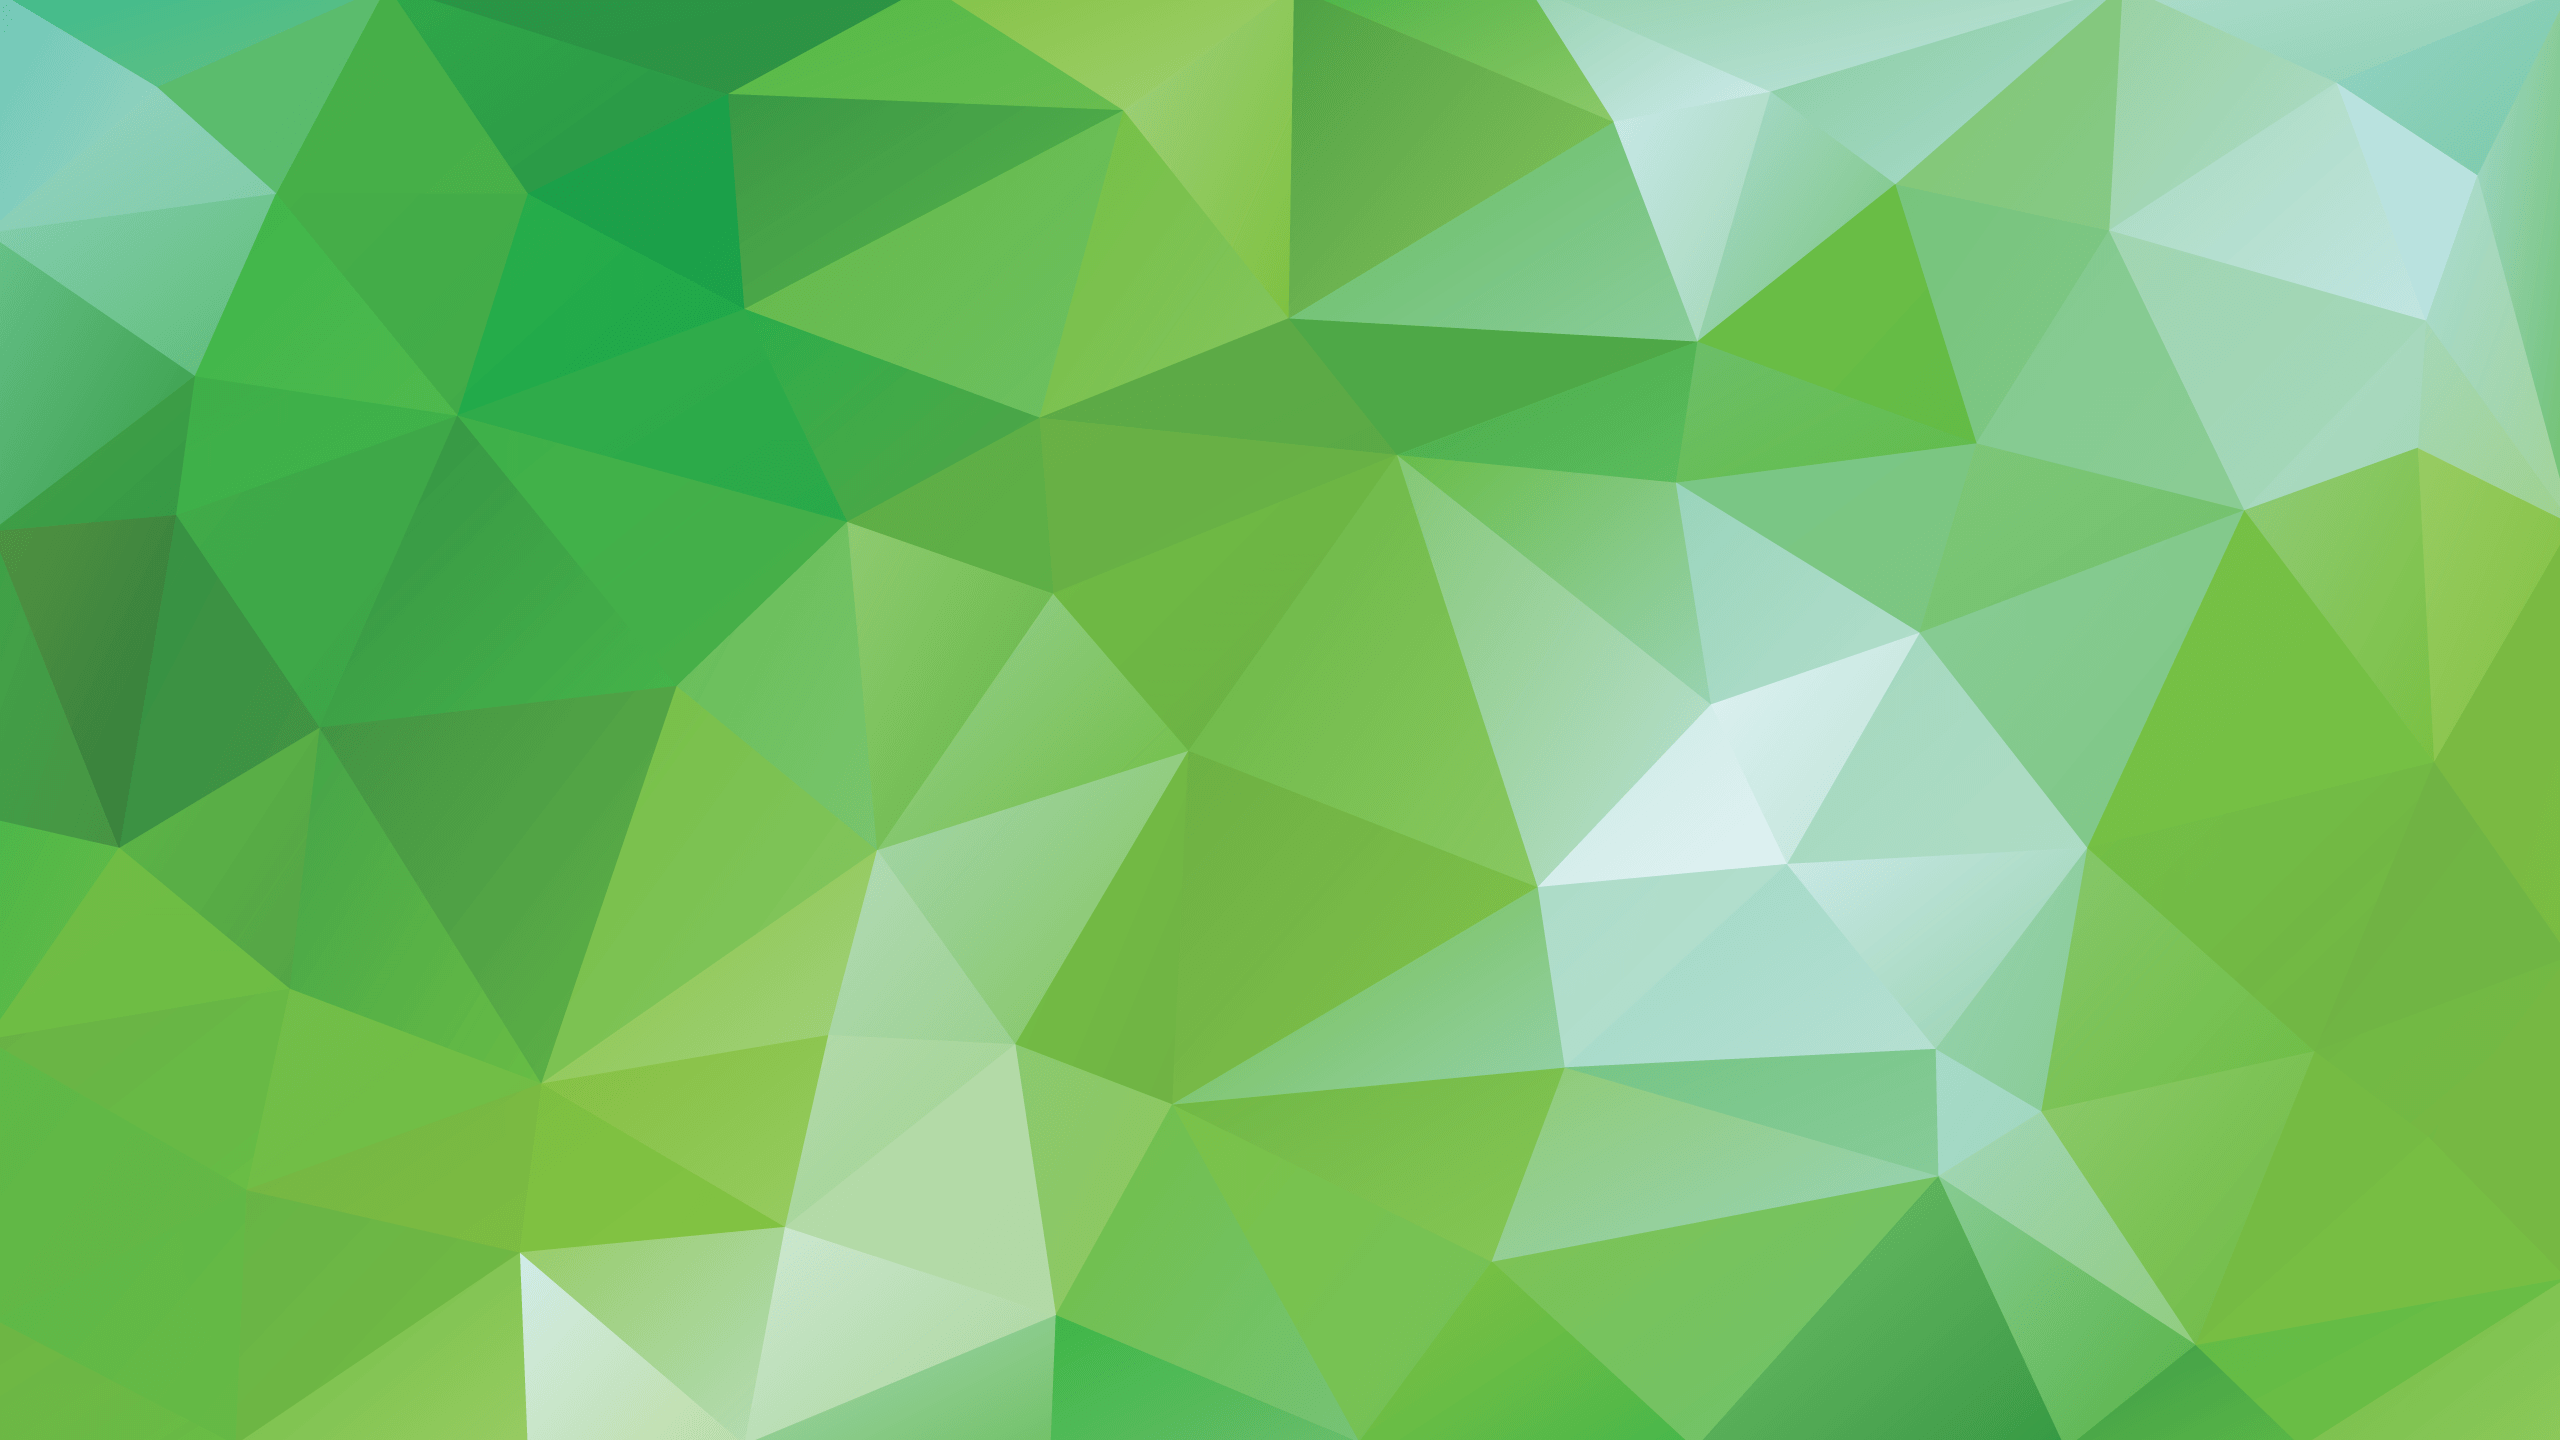 Tessellation Patterns Vector Background for Designers